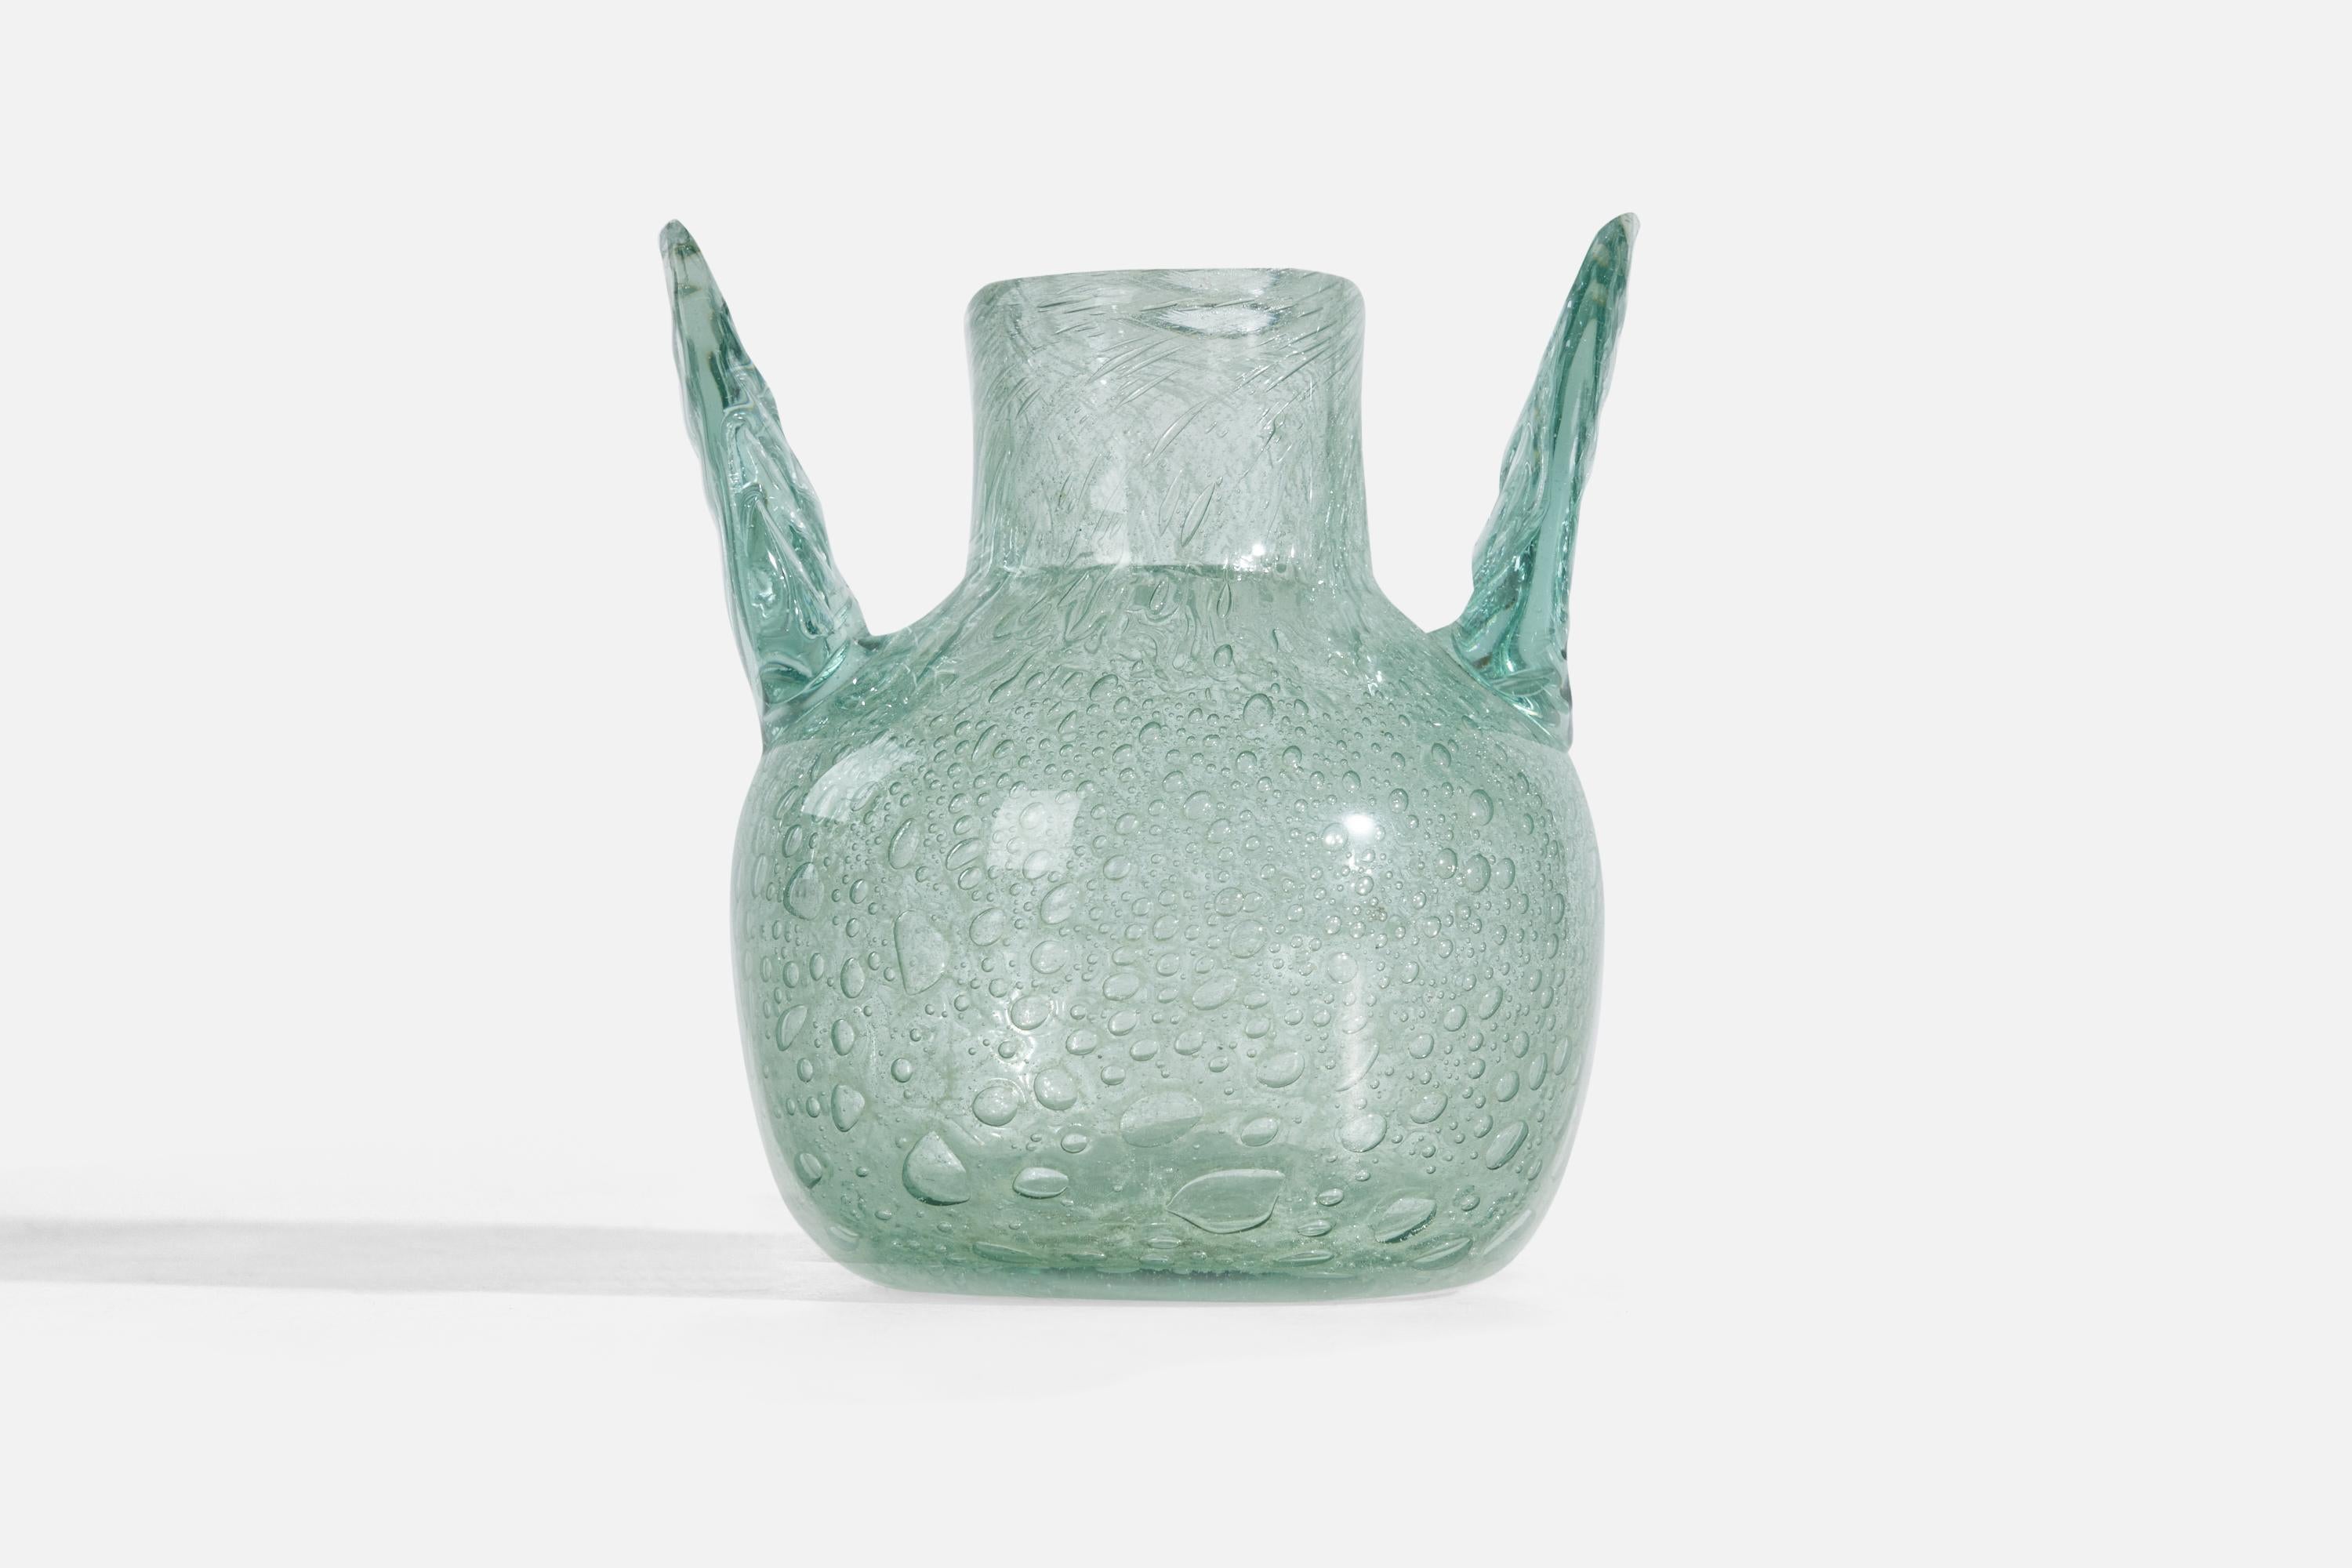 A green glass vase designed by Ture Berglund and produced by Skansen Glas, 1940s.

